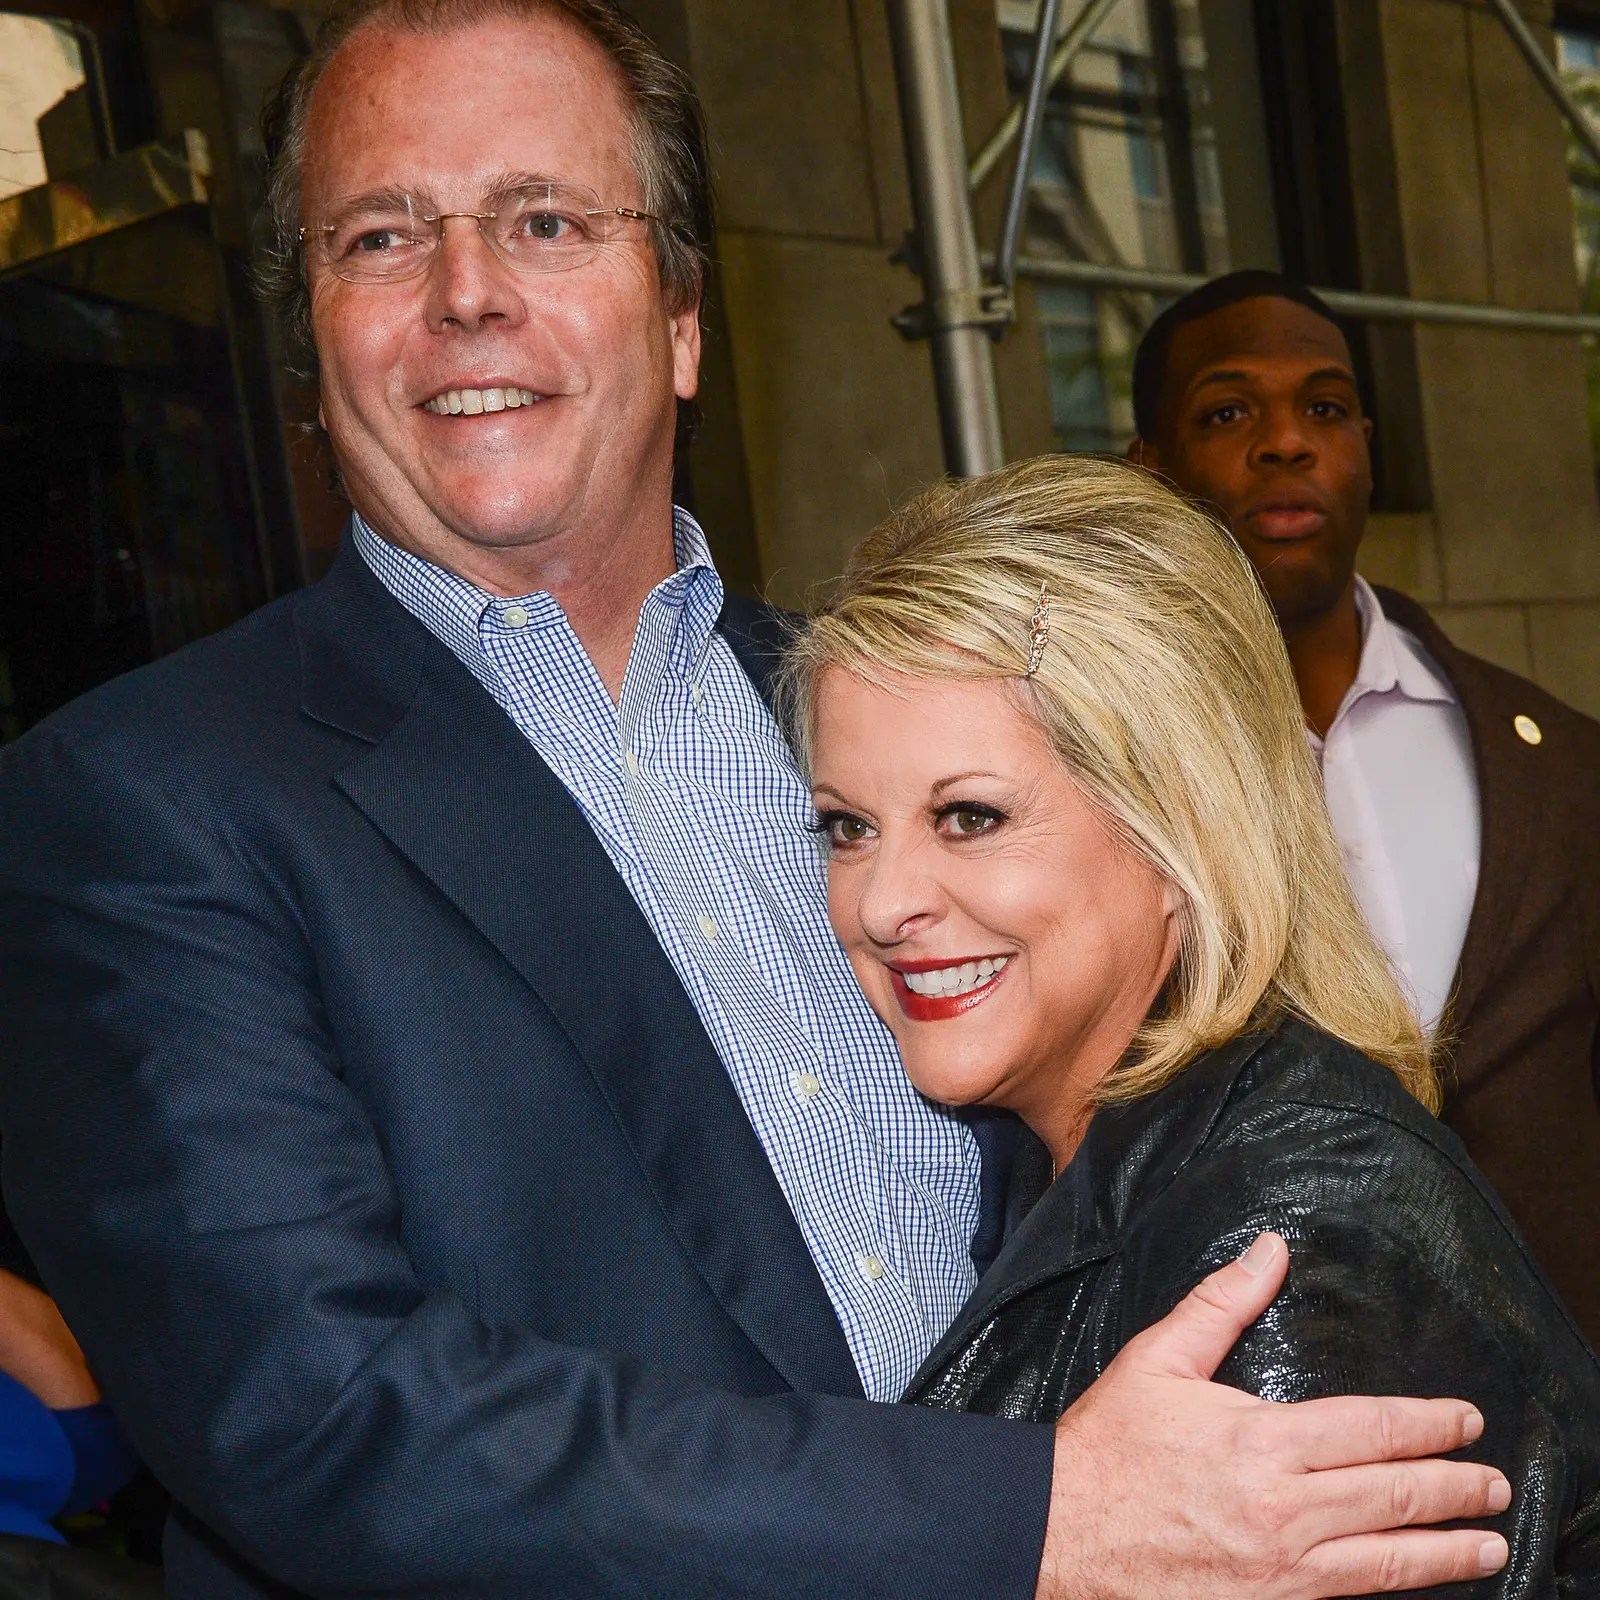 What Happened to Nancy Grace’s Fiancé? He Died When She Was 19